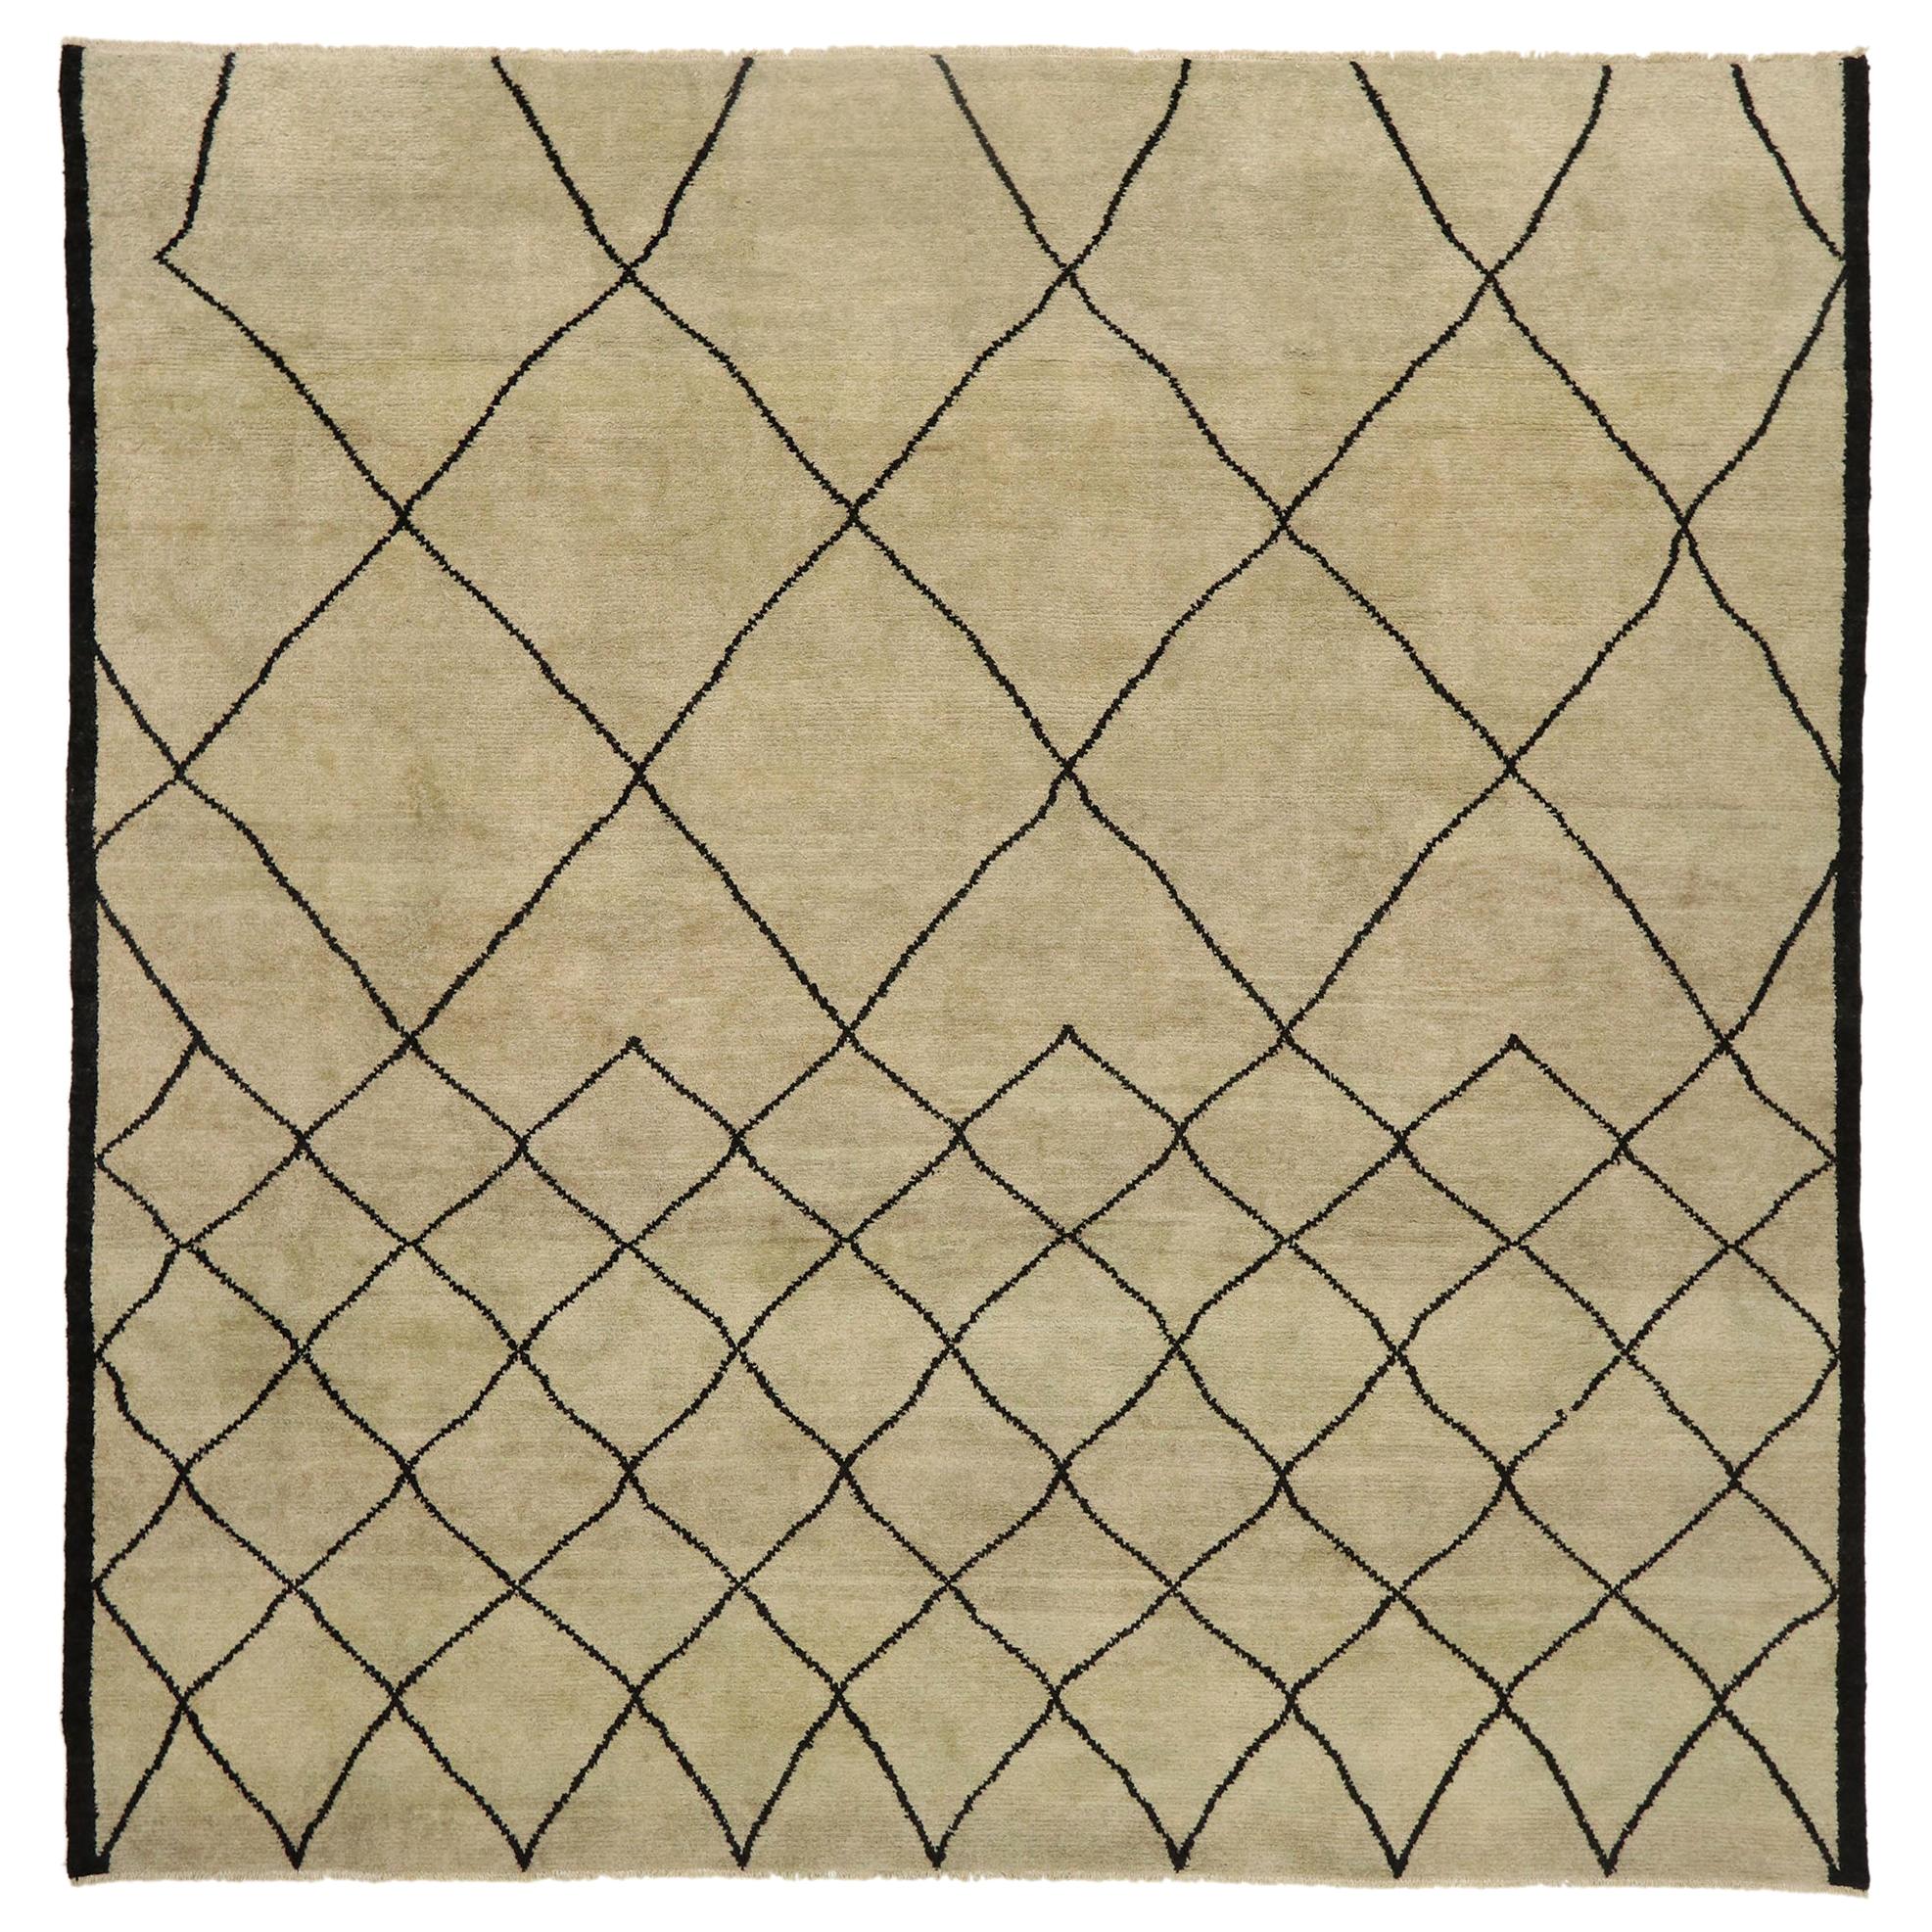 New Contemporary Moroccan Design Rug with Mid-Century Modern Style